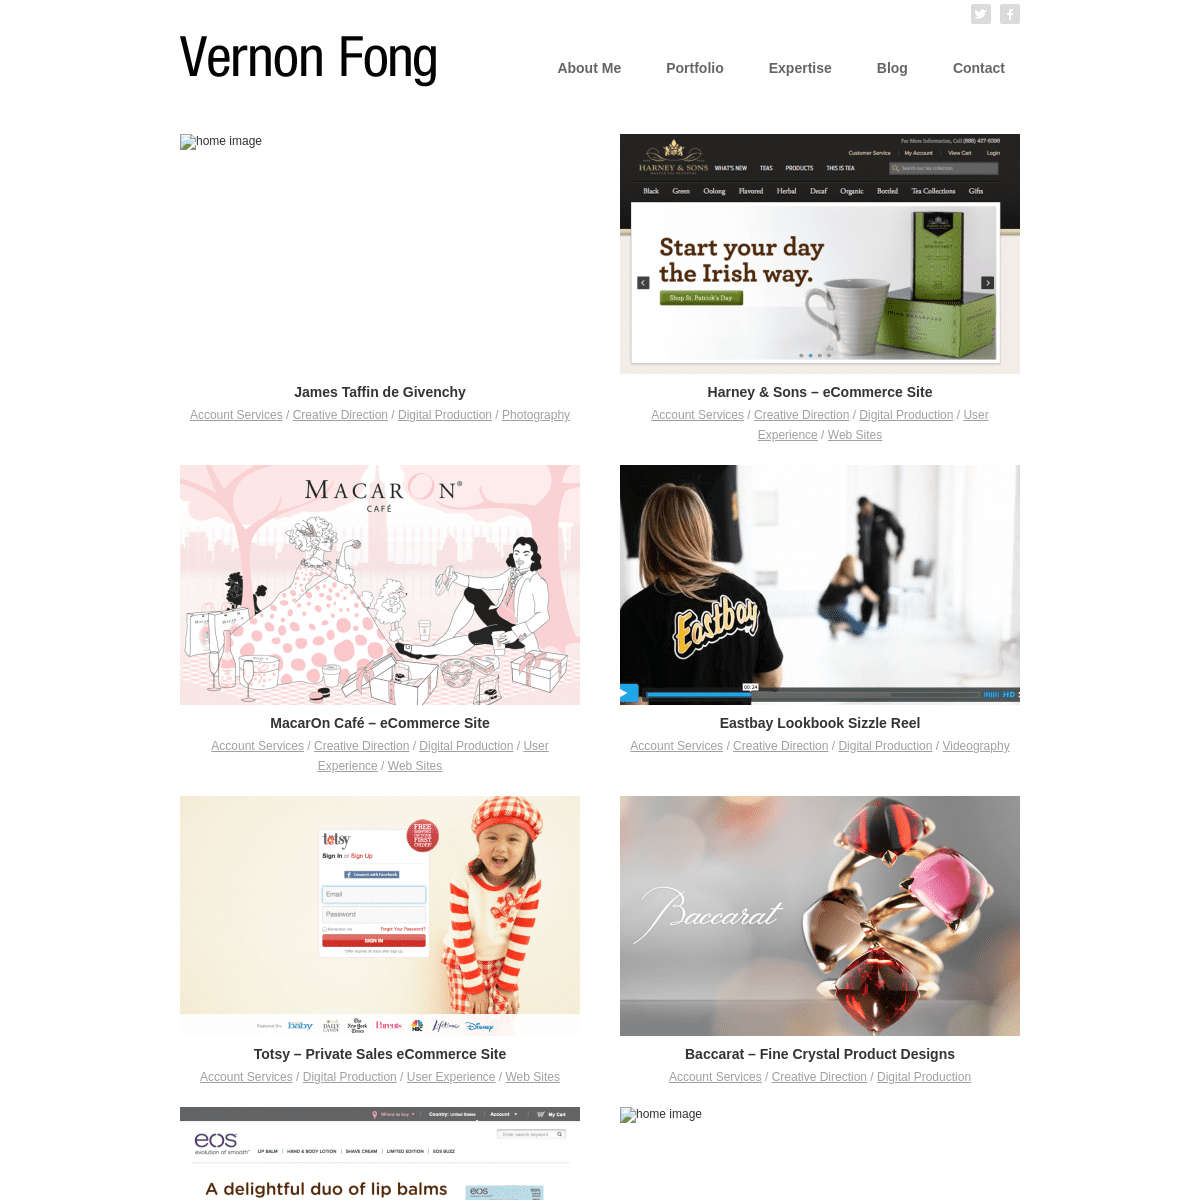 A complete backup of vernonfong.com